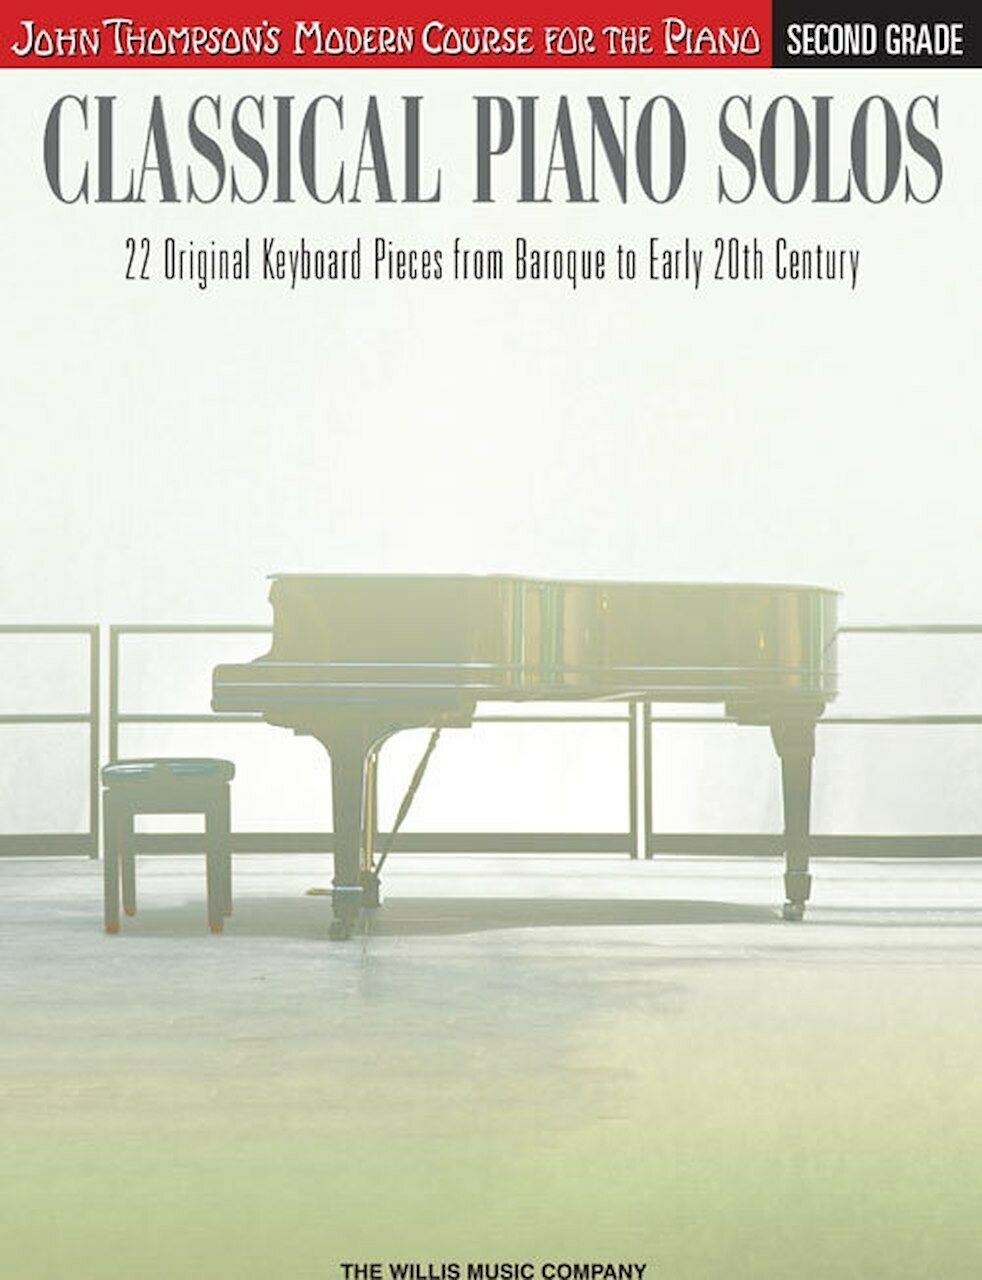 Classical Piano Solos - Second Grade - 22 Original Keyboard Pieces from Baroq...